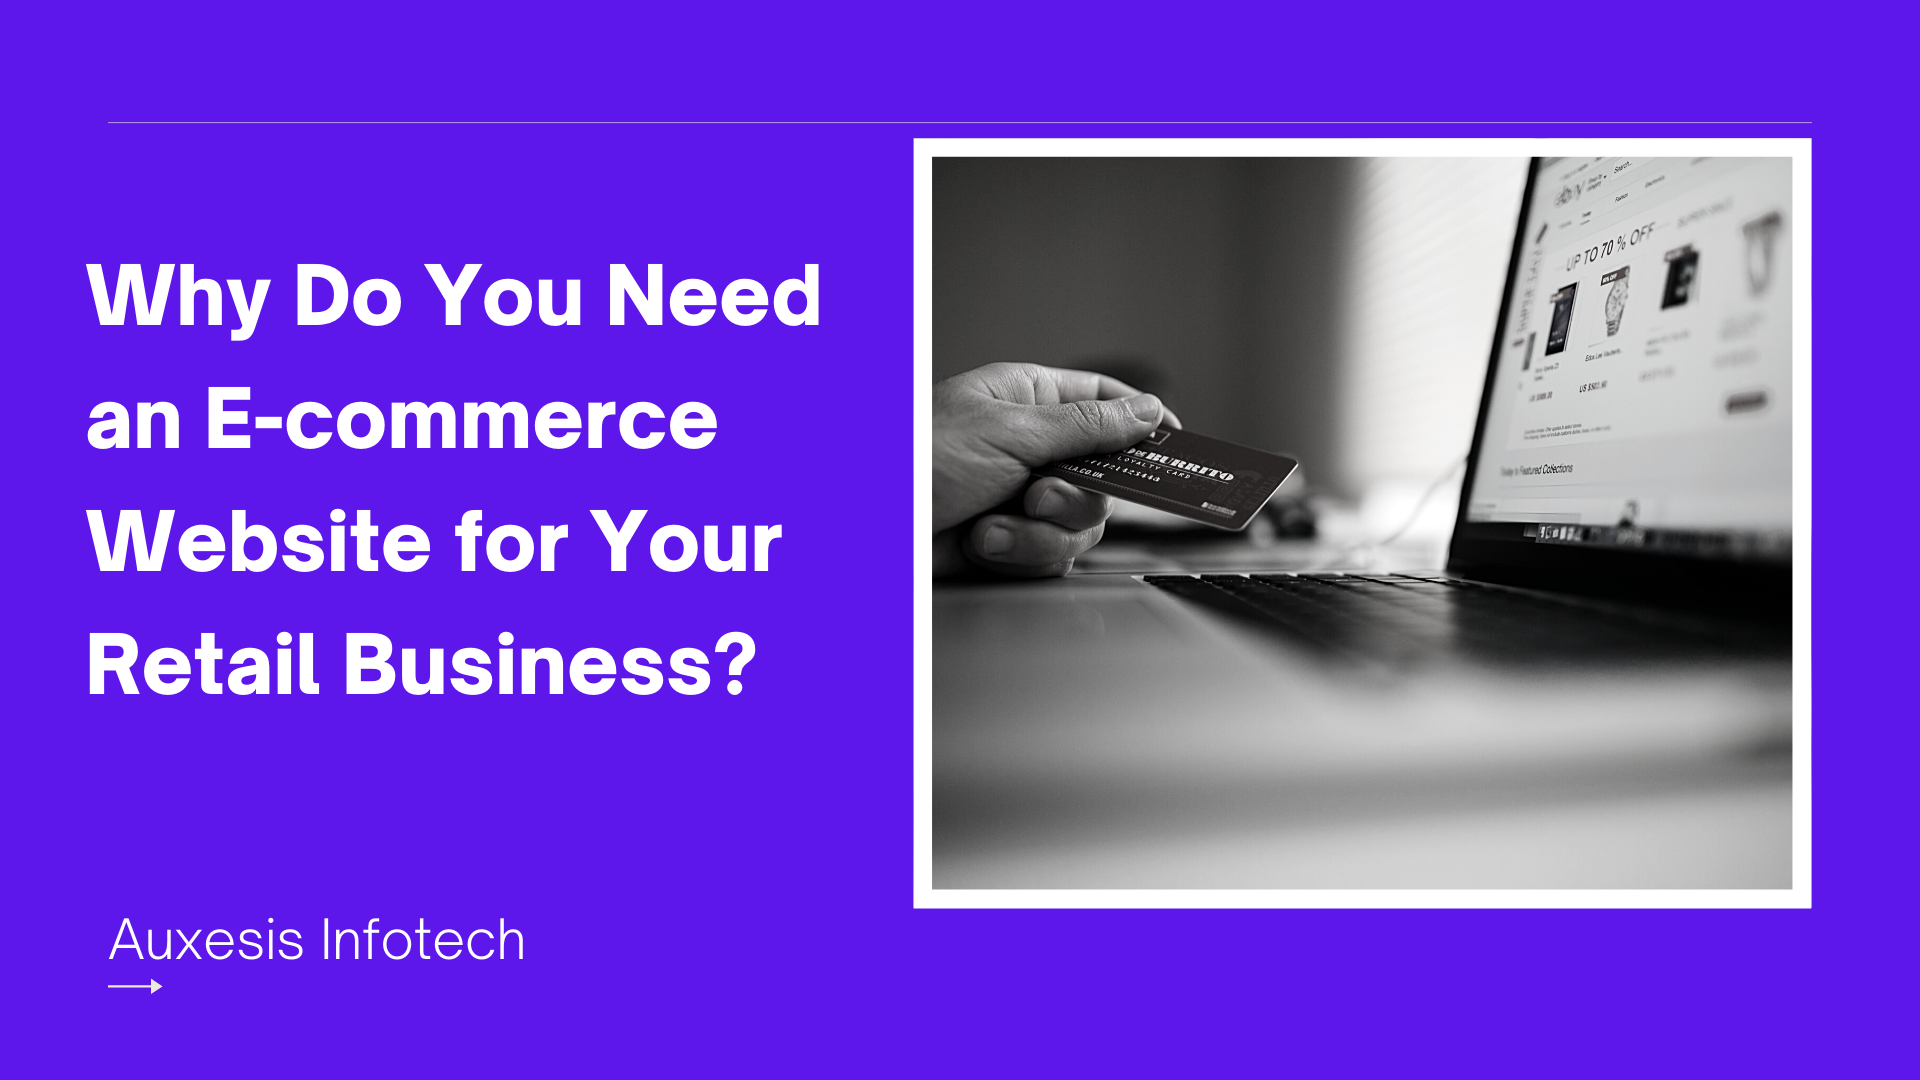 Why Do You Need an E-commerce Website for Your Retail Business